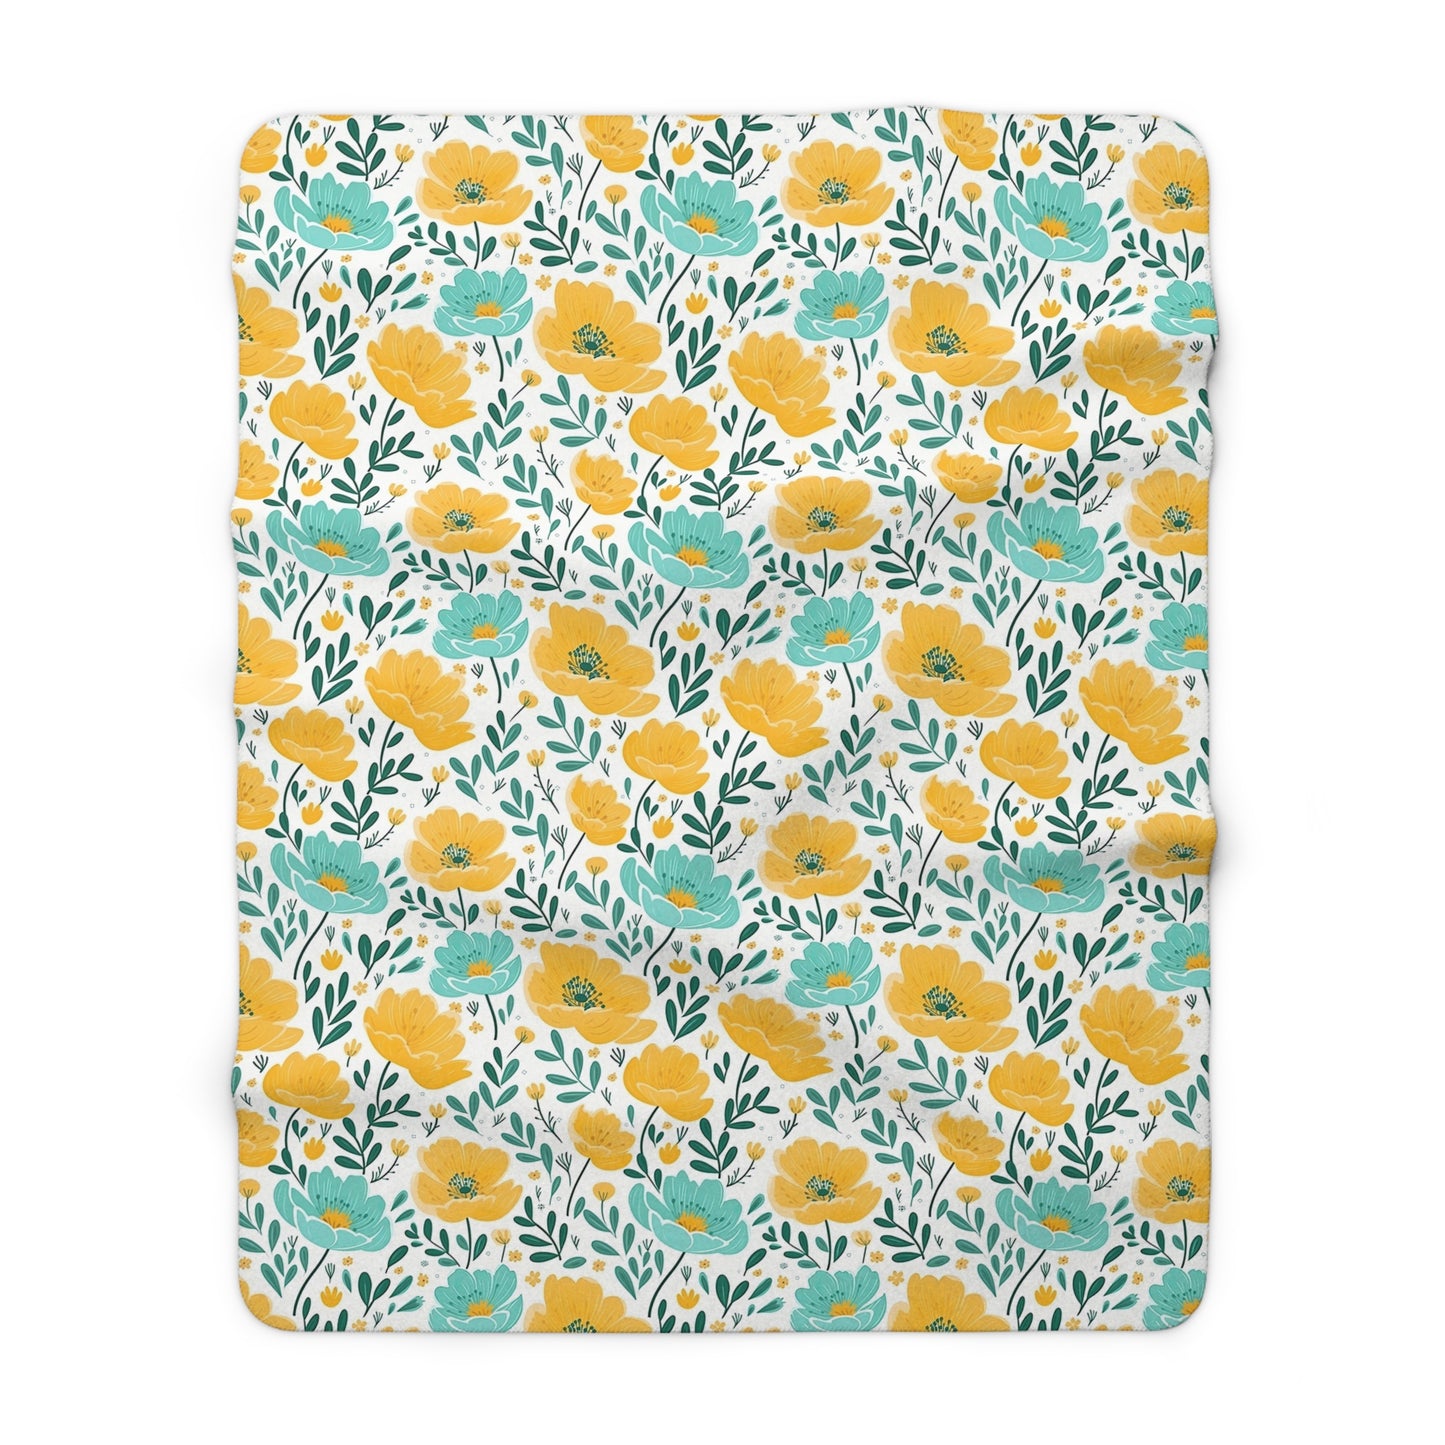 Yellow Teal Floral Sherpa Blanket - Yellow Floral Sherpa Blanket